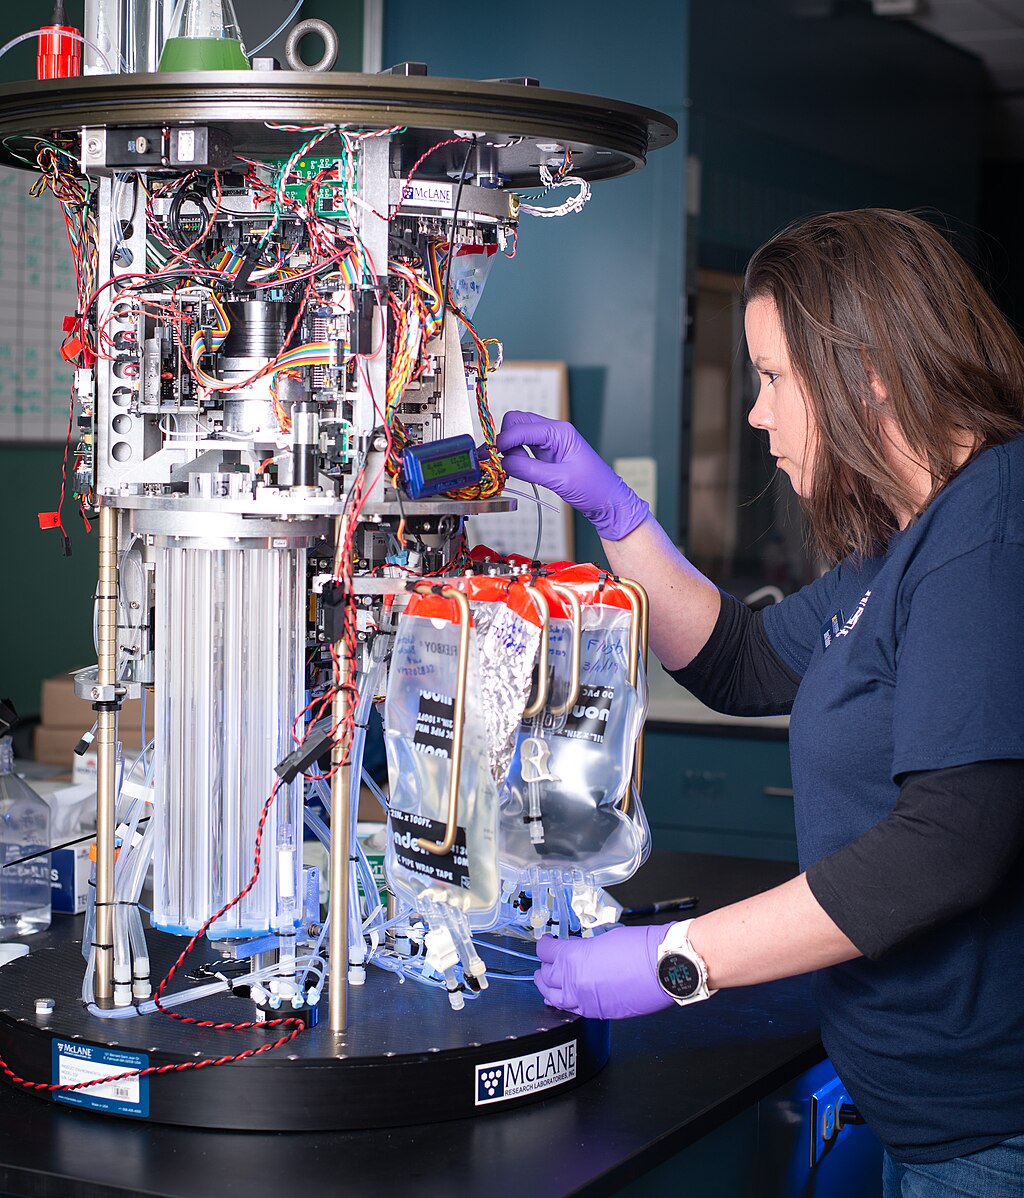 Student at work in the NOAA CIGLR Lab at the University of Michigan School for Environment and Sustainability